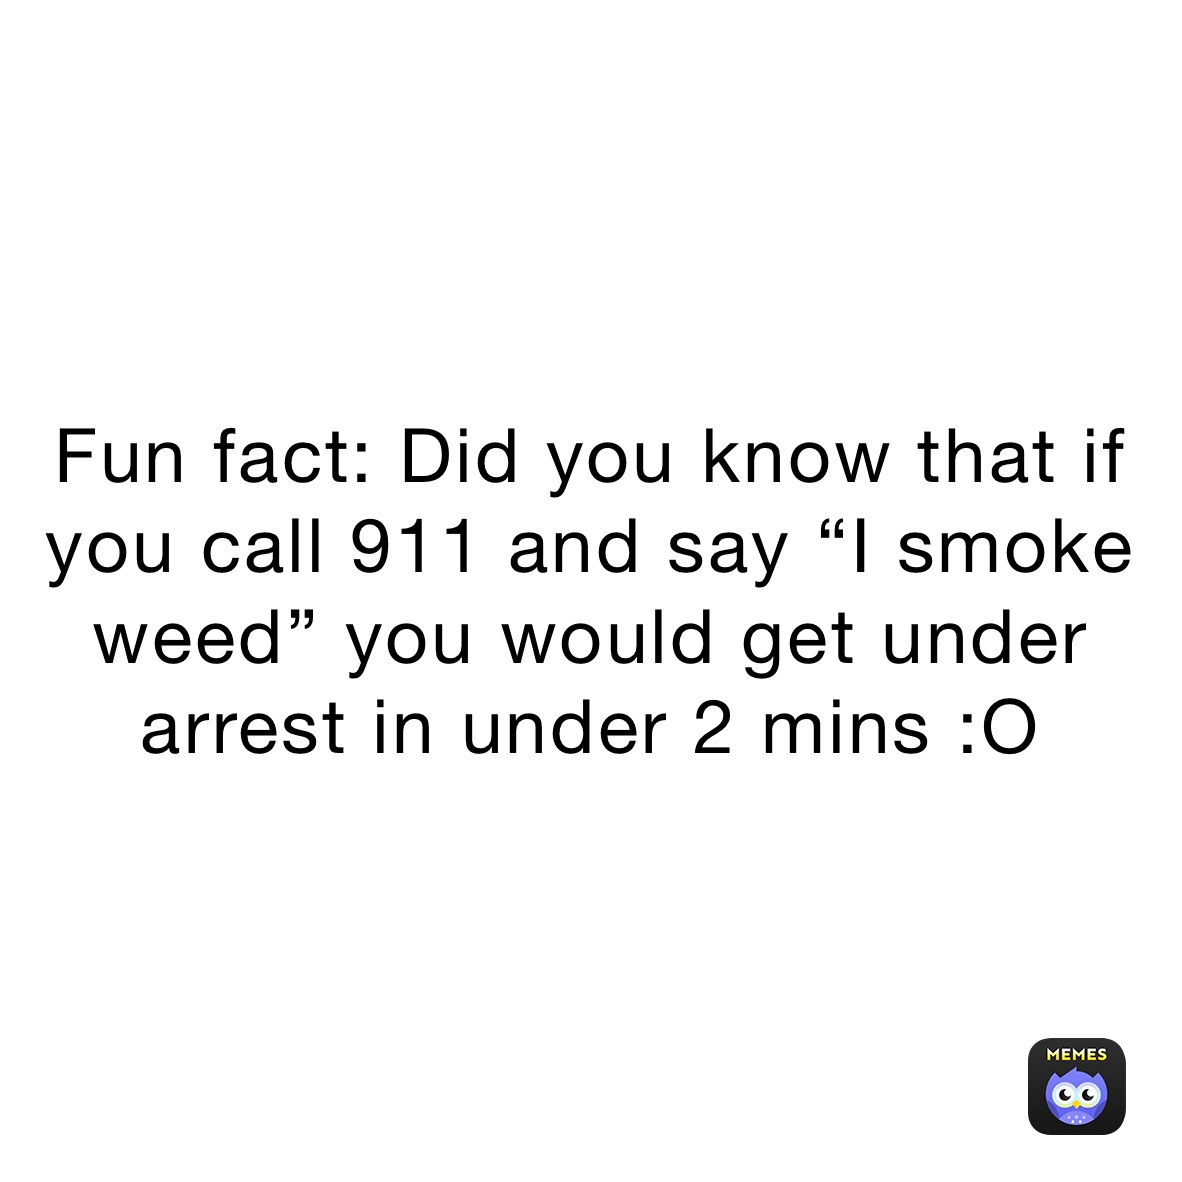 Fun fact: Did you know that if you call 911 and say “I smoke weed” you would get under arrest in under 2 mins :O